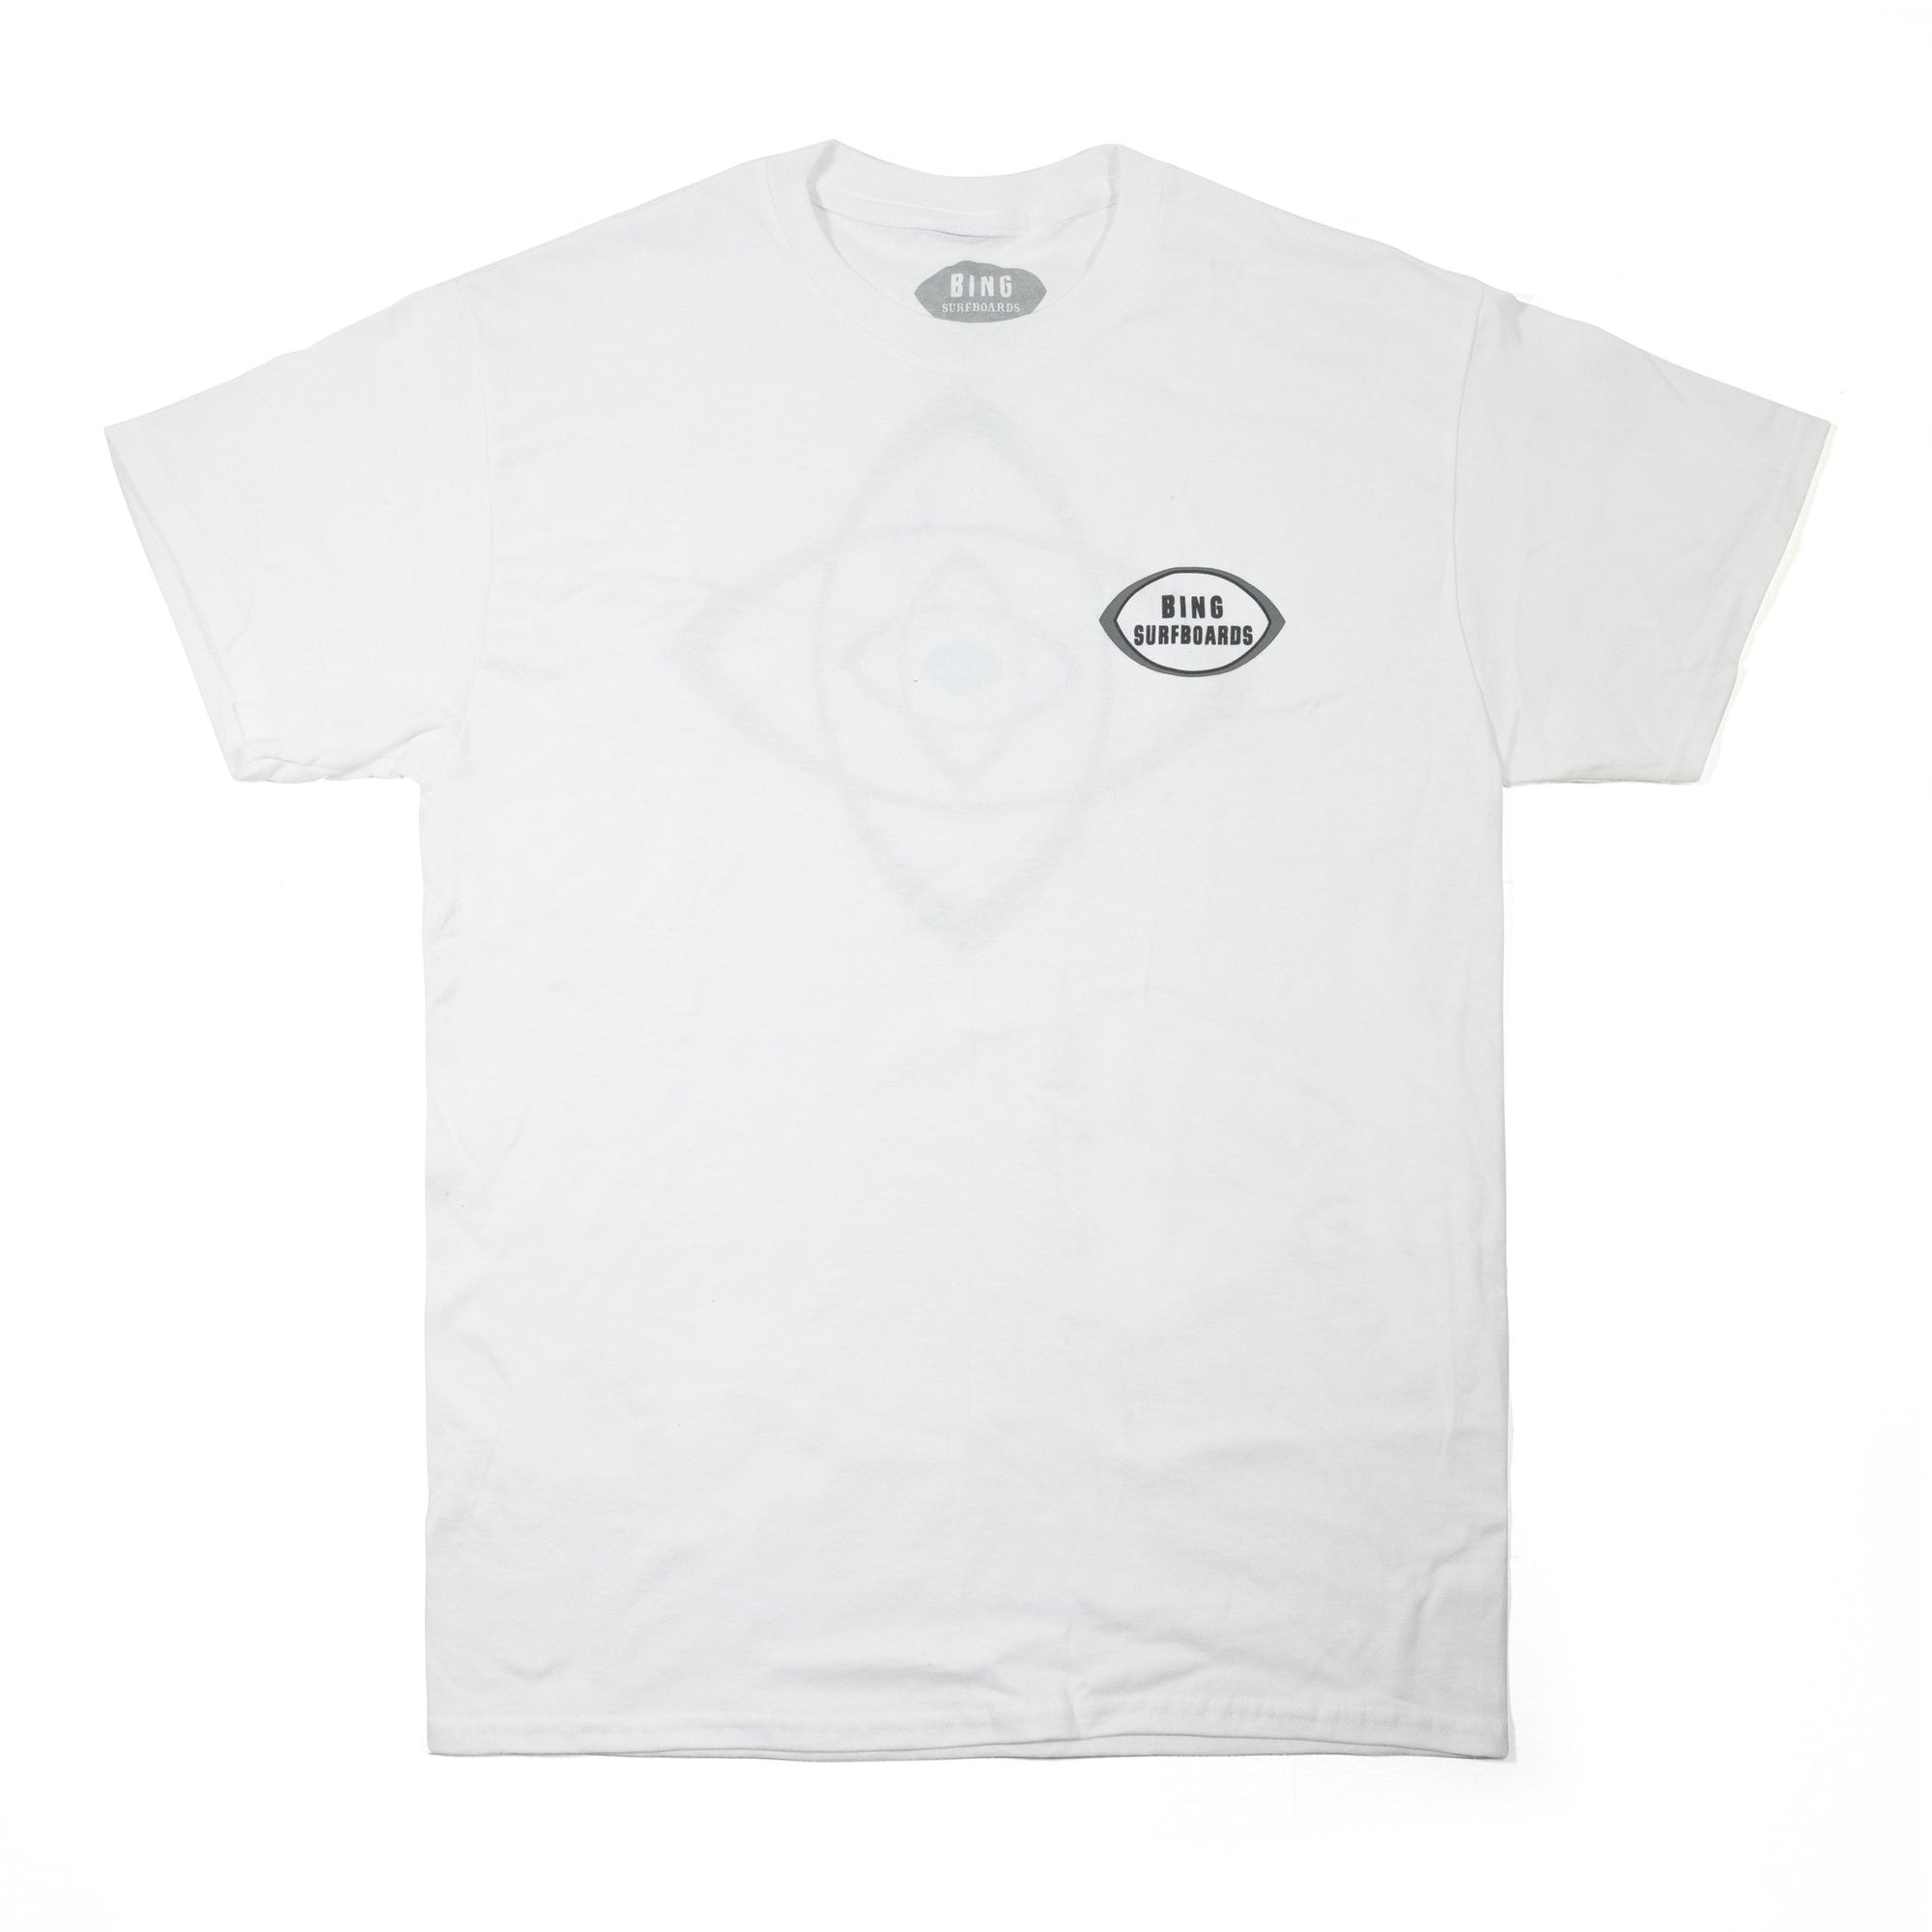 SILVER SPOON Classic S/S T-Shirt - White